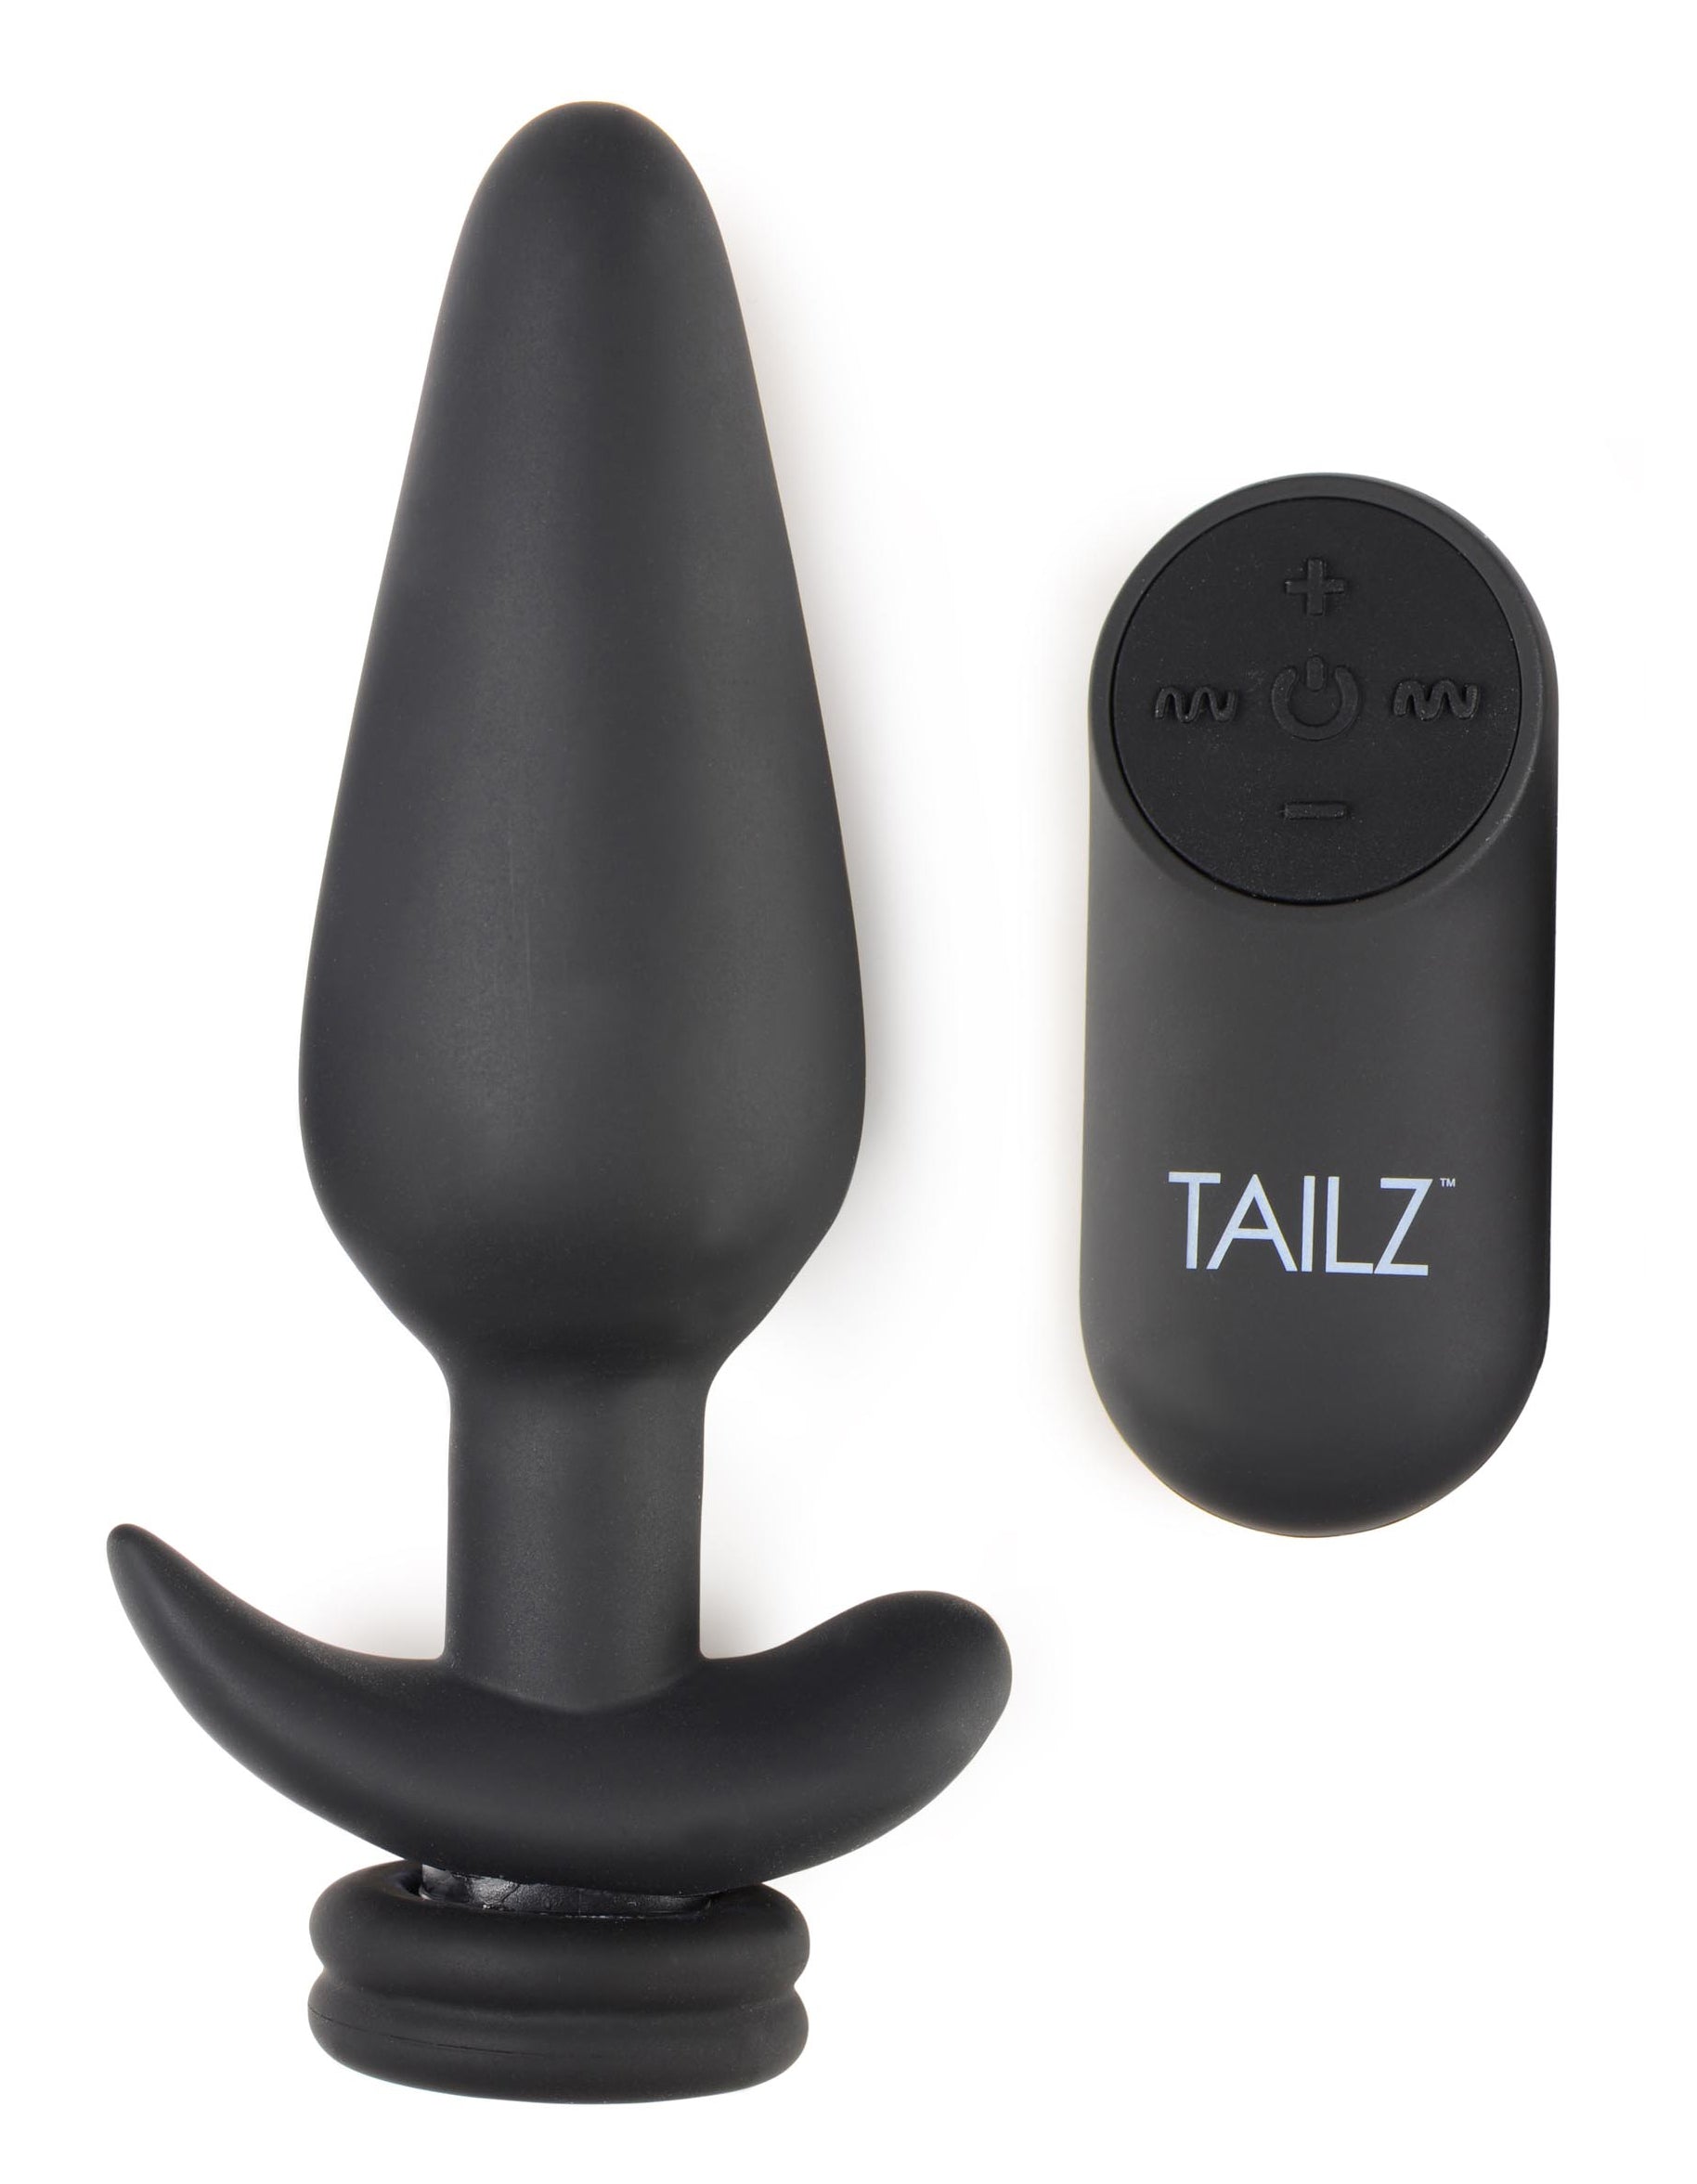 Interchangeable 10X Vibrating Silicone Anal Plug with Remote - Small - UABDSM